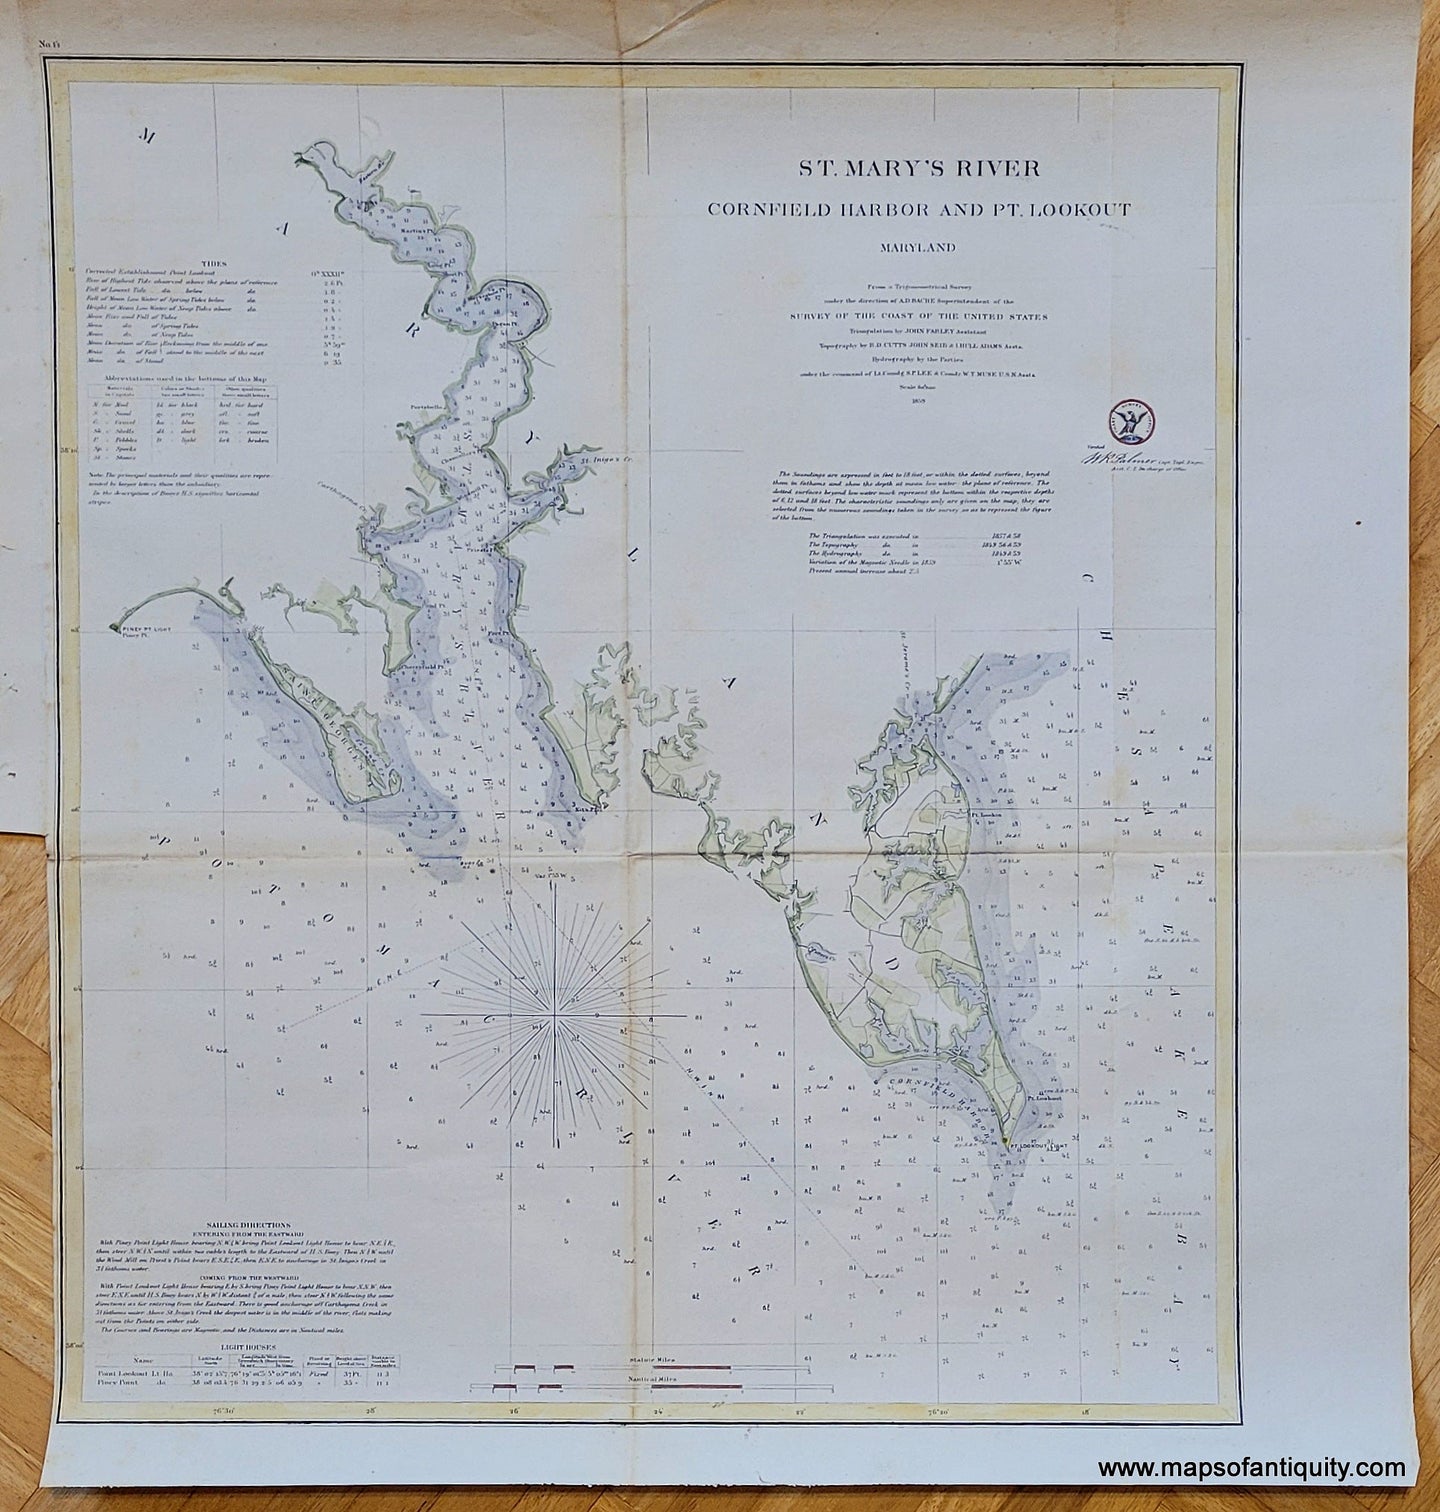 Genuine-Antique-Coast-Survey-Chart-St-Mary's-River,-Cornfield-Harbor-and-Pt.-Lookout,-Maryland-1859-US-Coast-Survey-Maps-Of-Antiquity